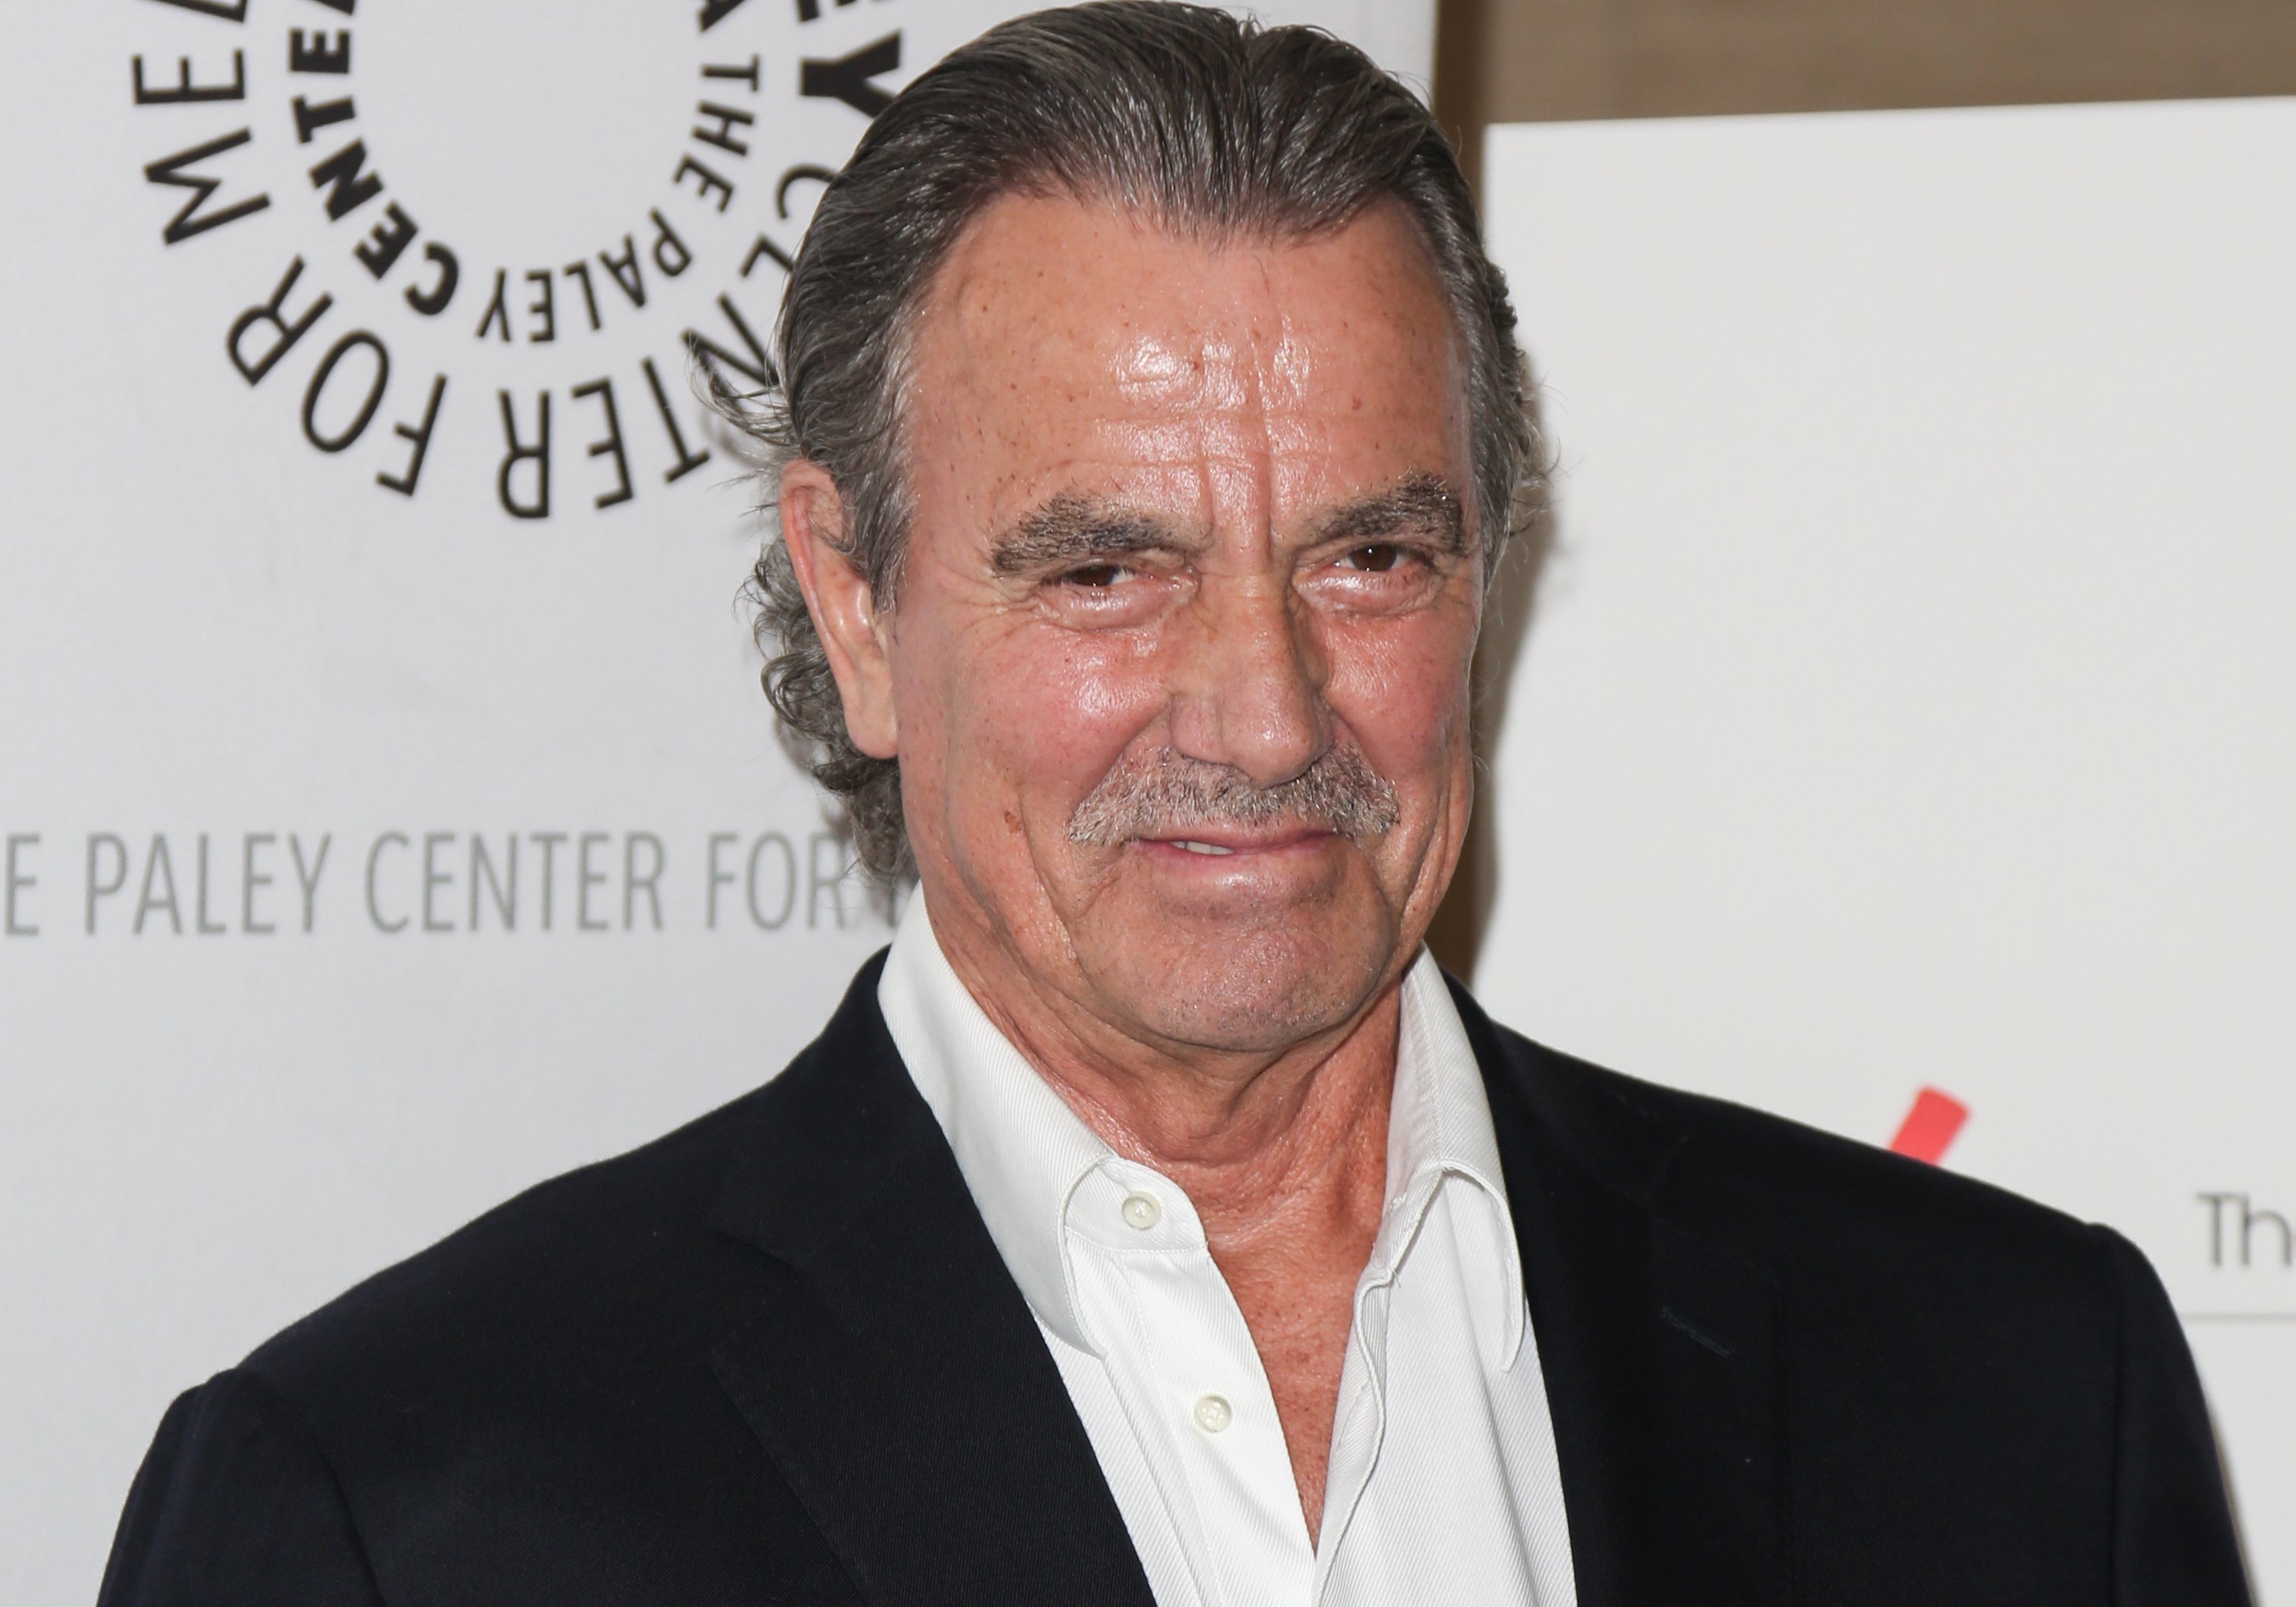 'The Young and the Restless' spoilers focus on Victor Newman, played by actor Eric Braeden seen wearing a white shirt and black suit during a red carpet appearance.